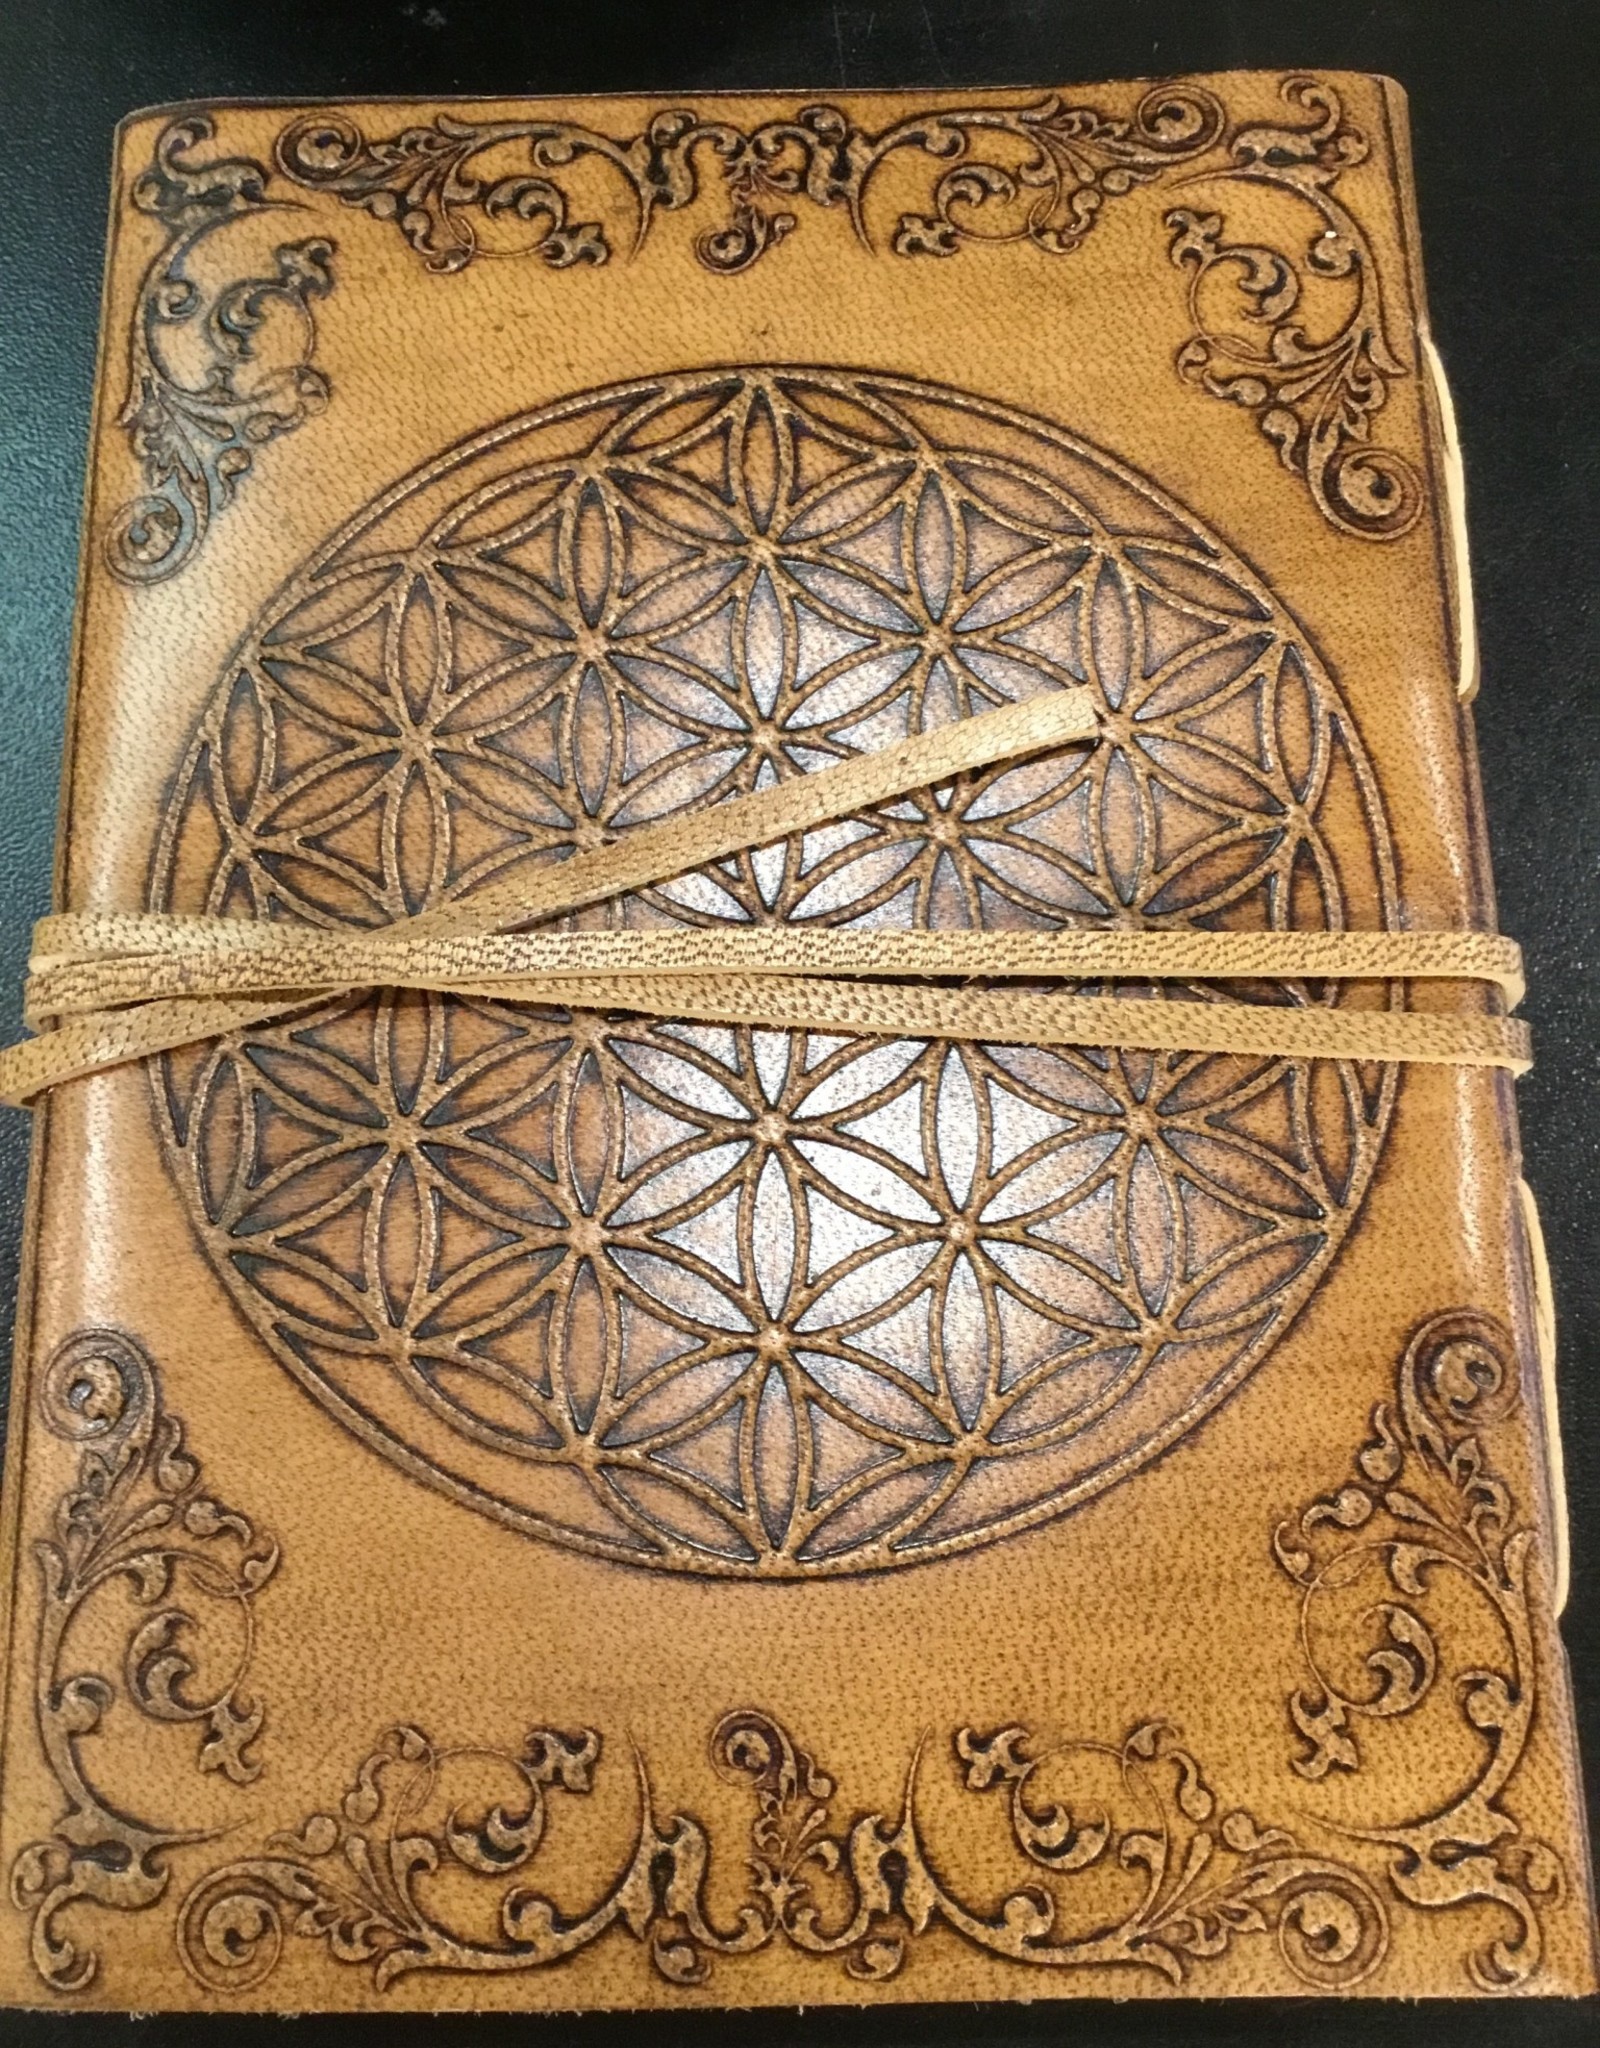 Leather Flower of LIfe Journal, strap and button 5X7